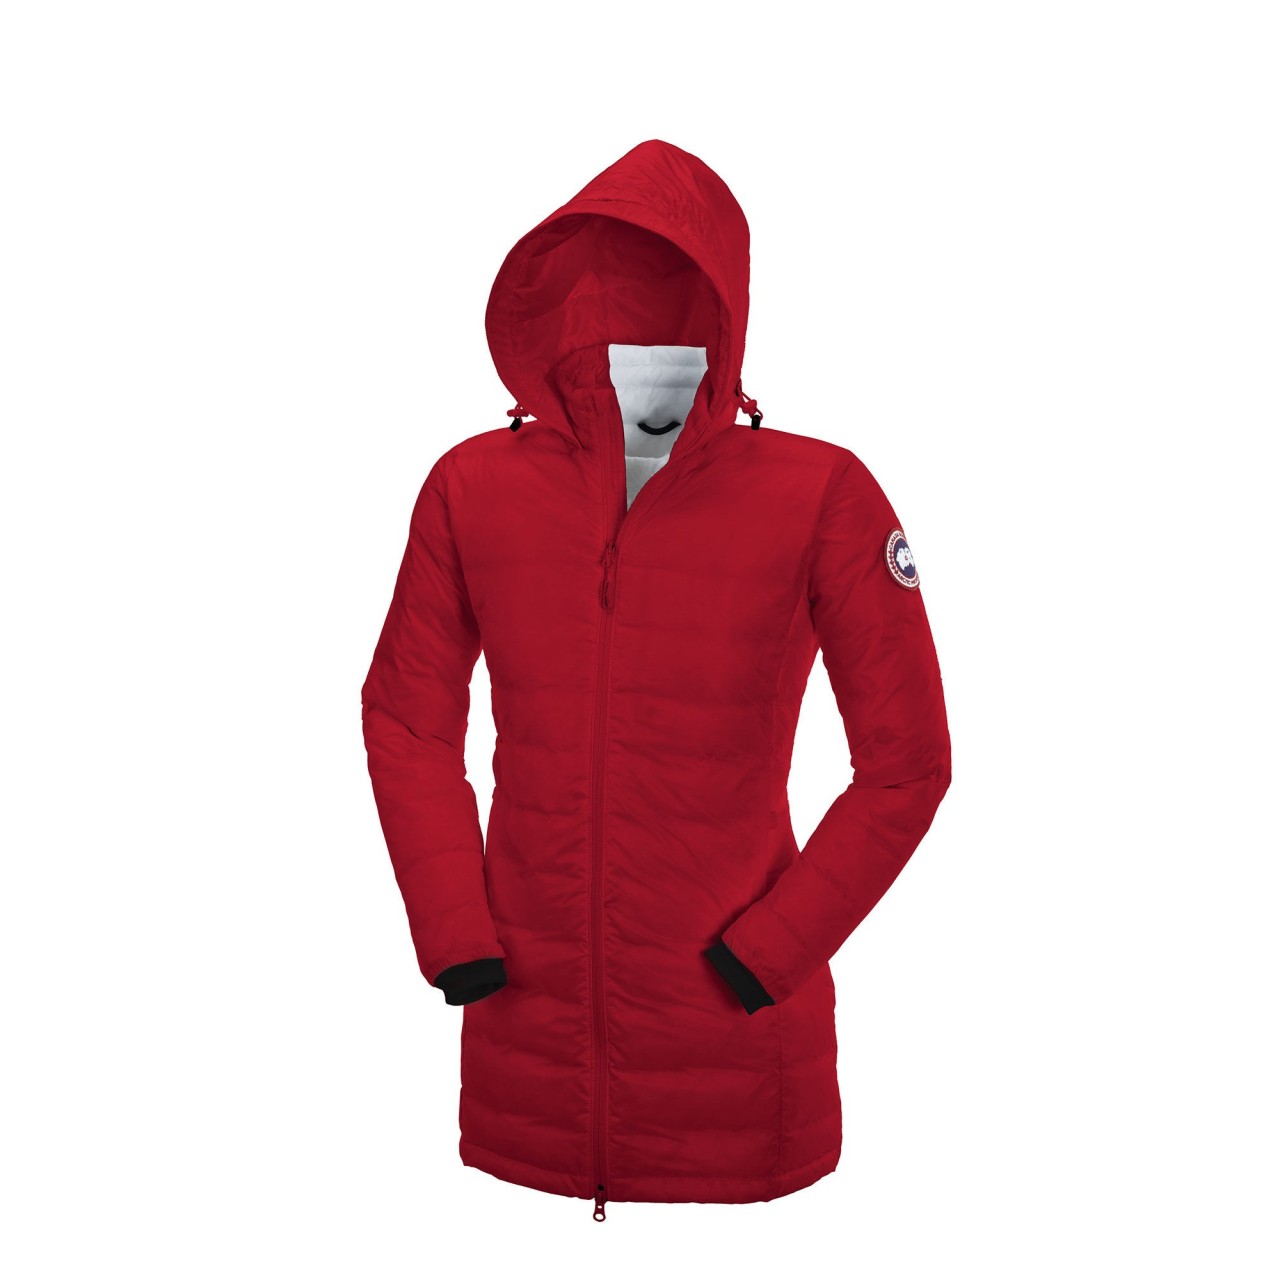 official canada goose outlet online store